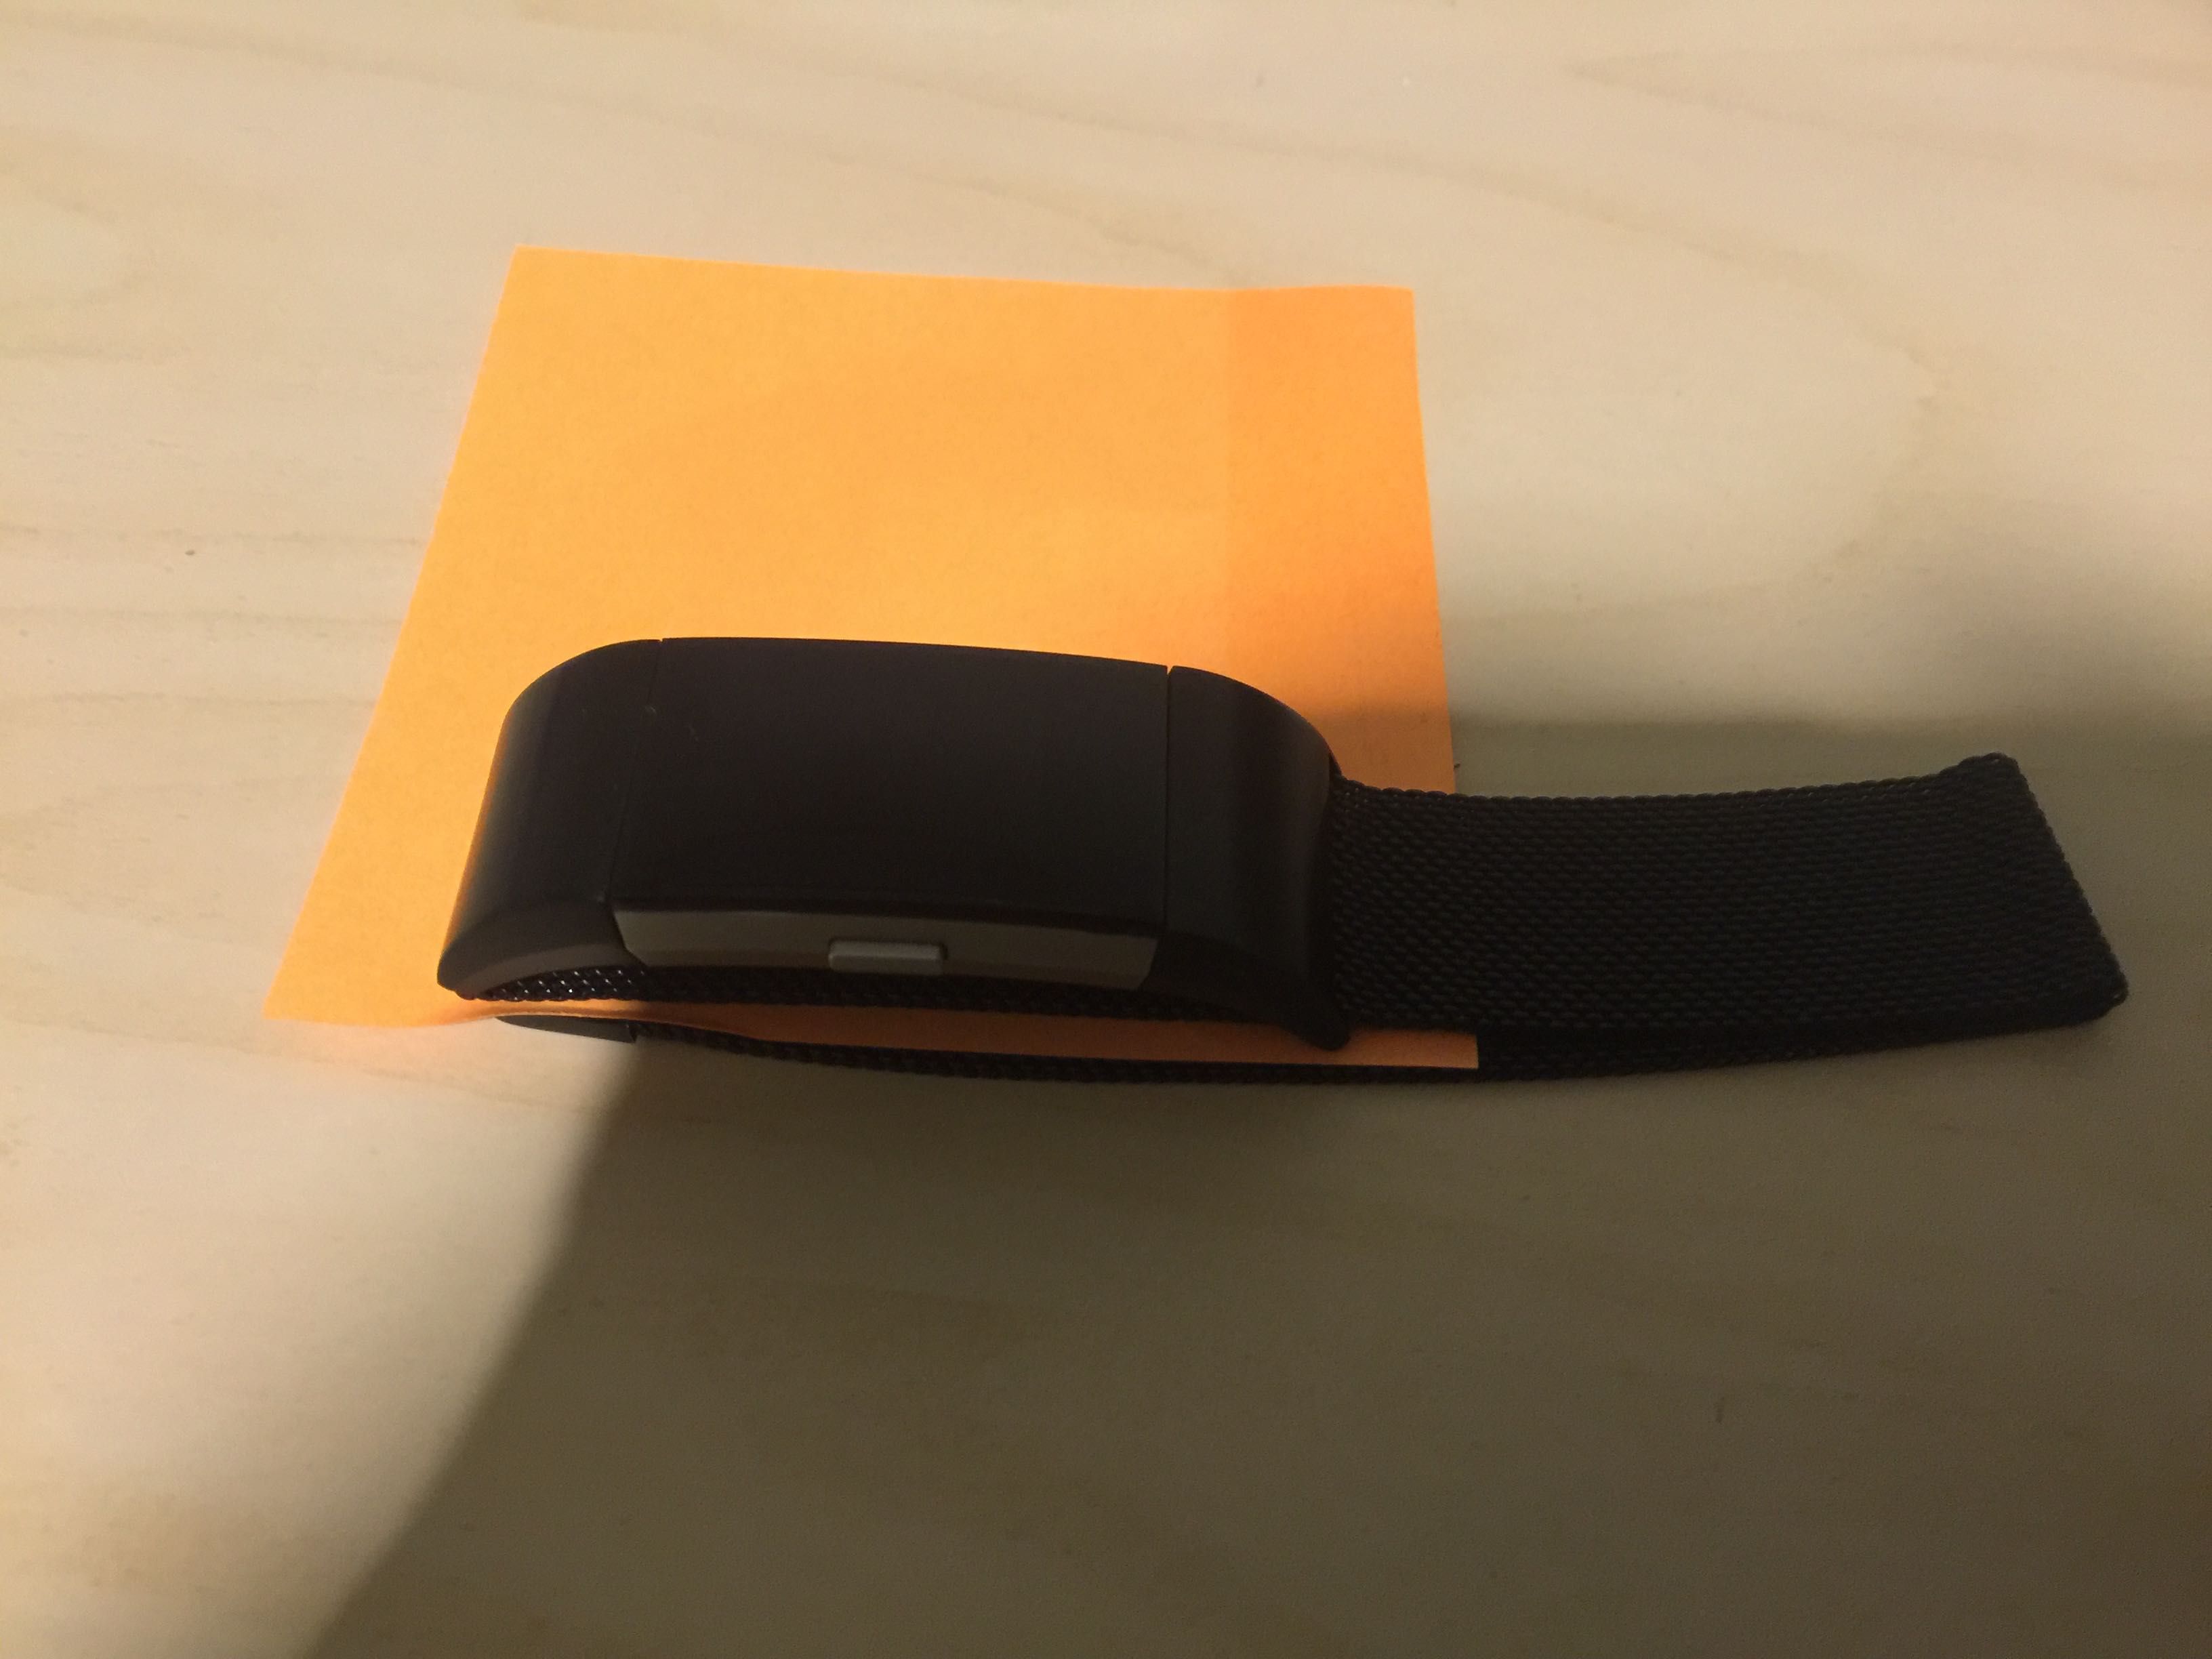 Solved: Clip for charge 2? - Fitbit 